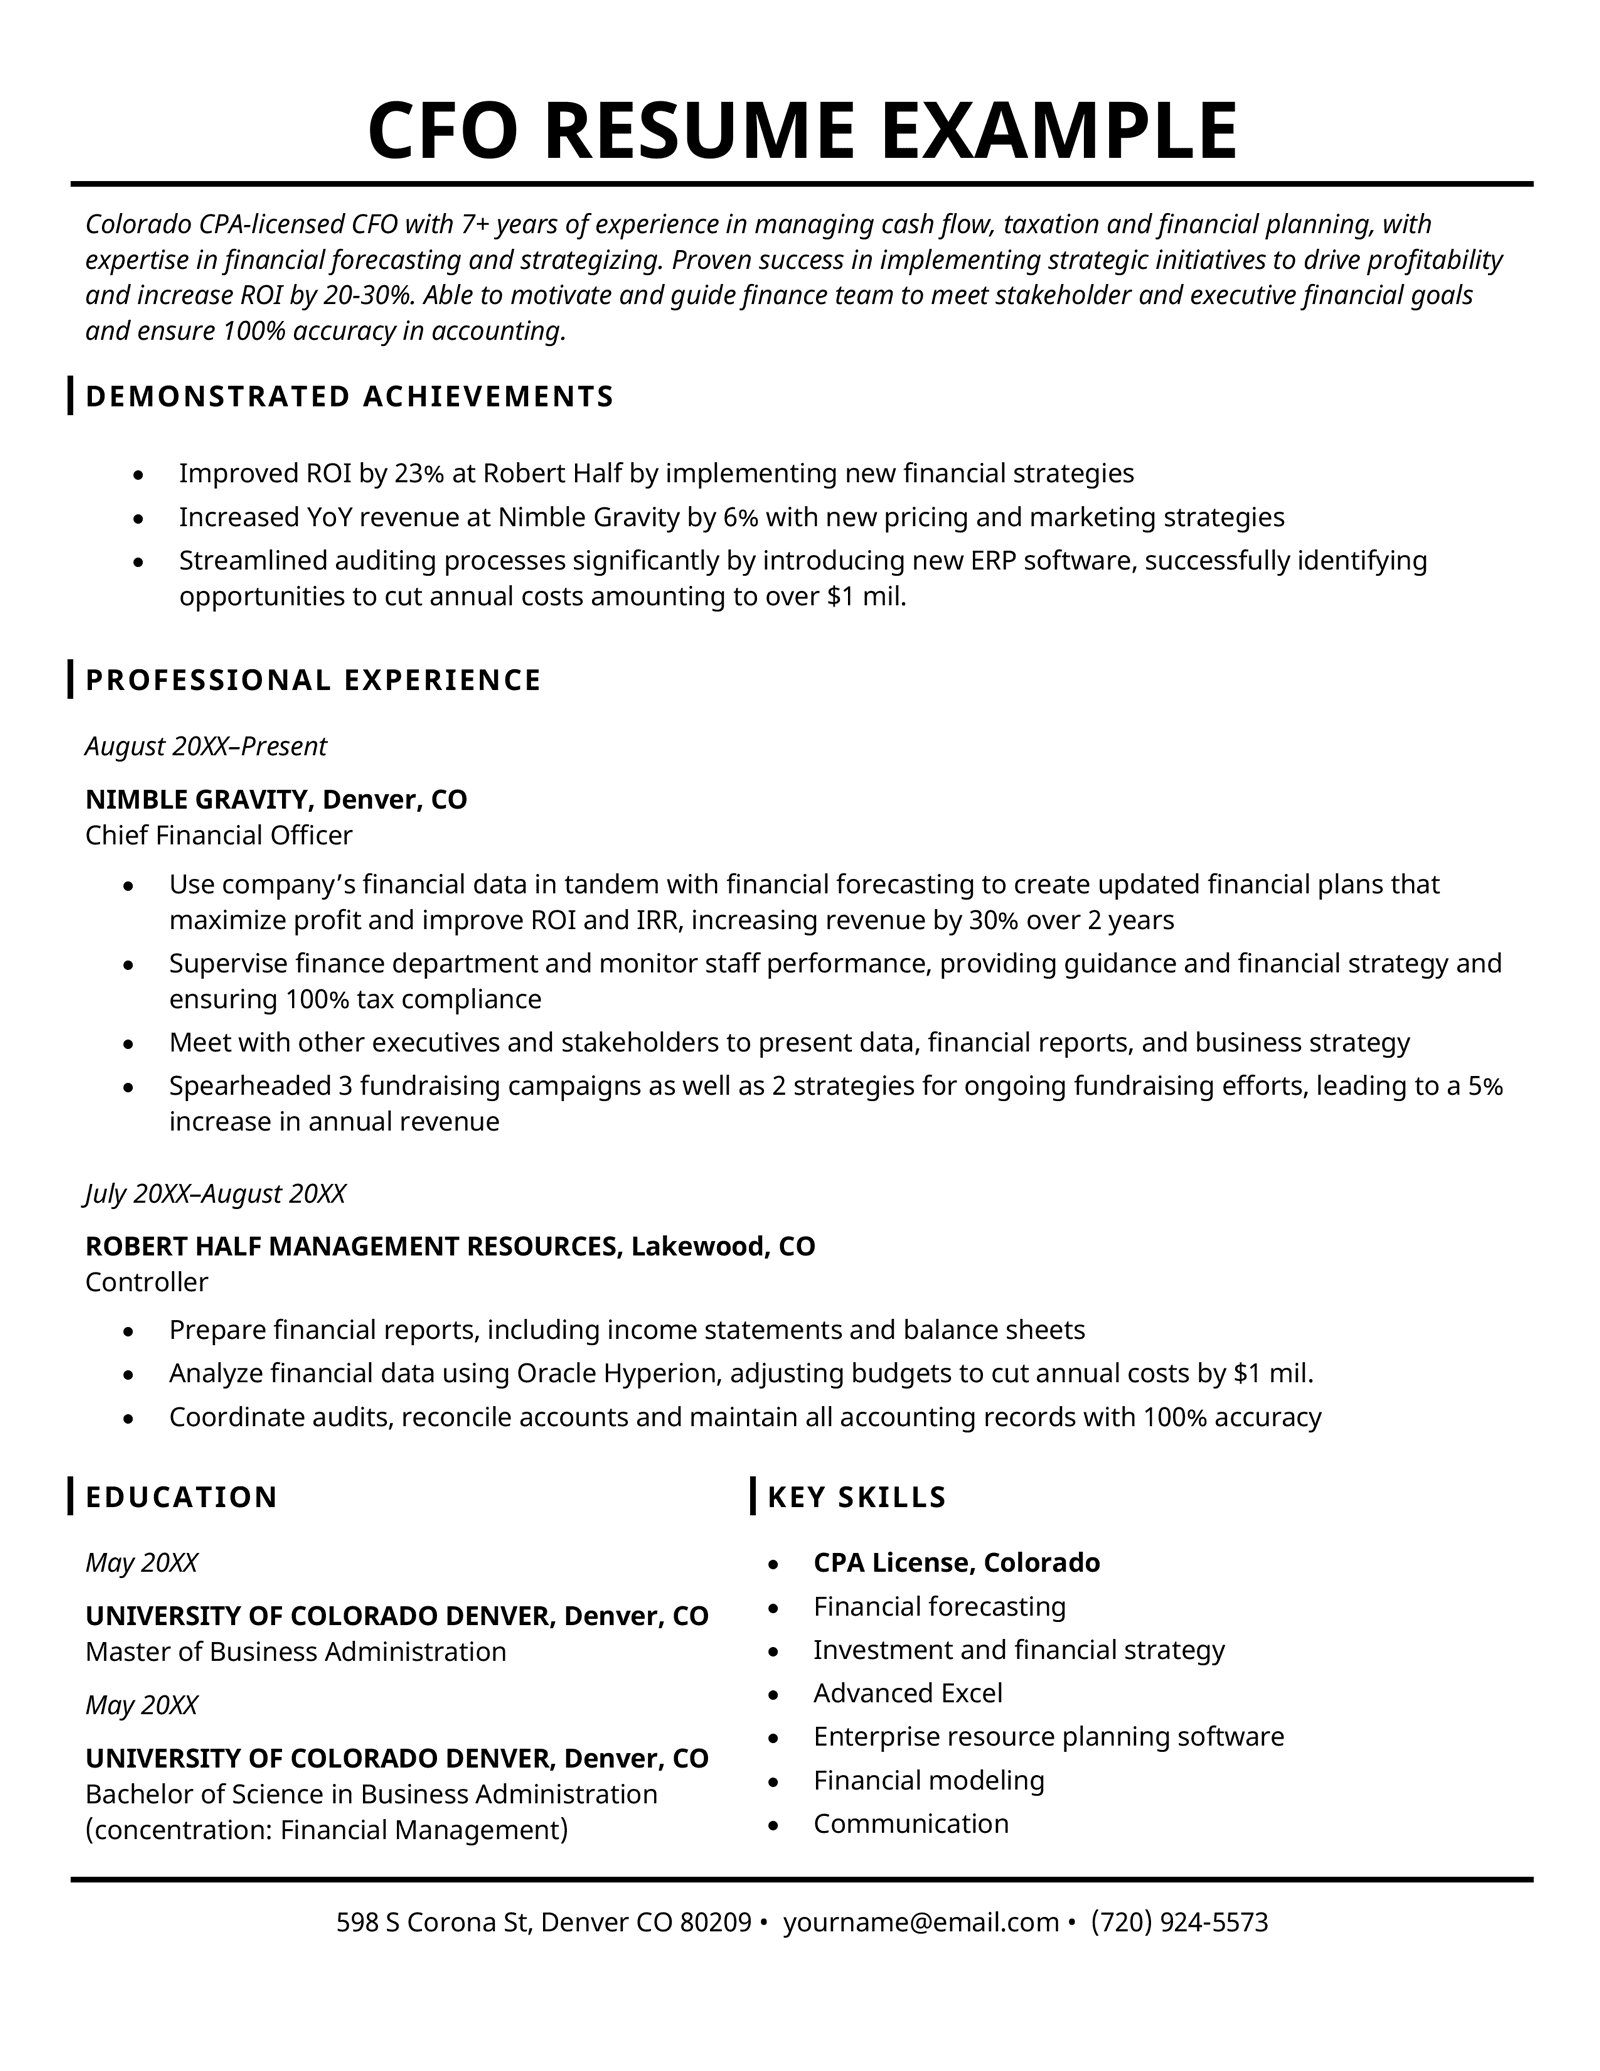 Example of a CFO resume.